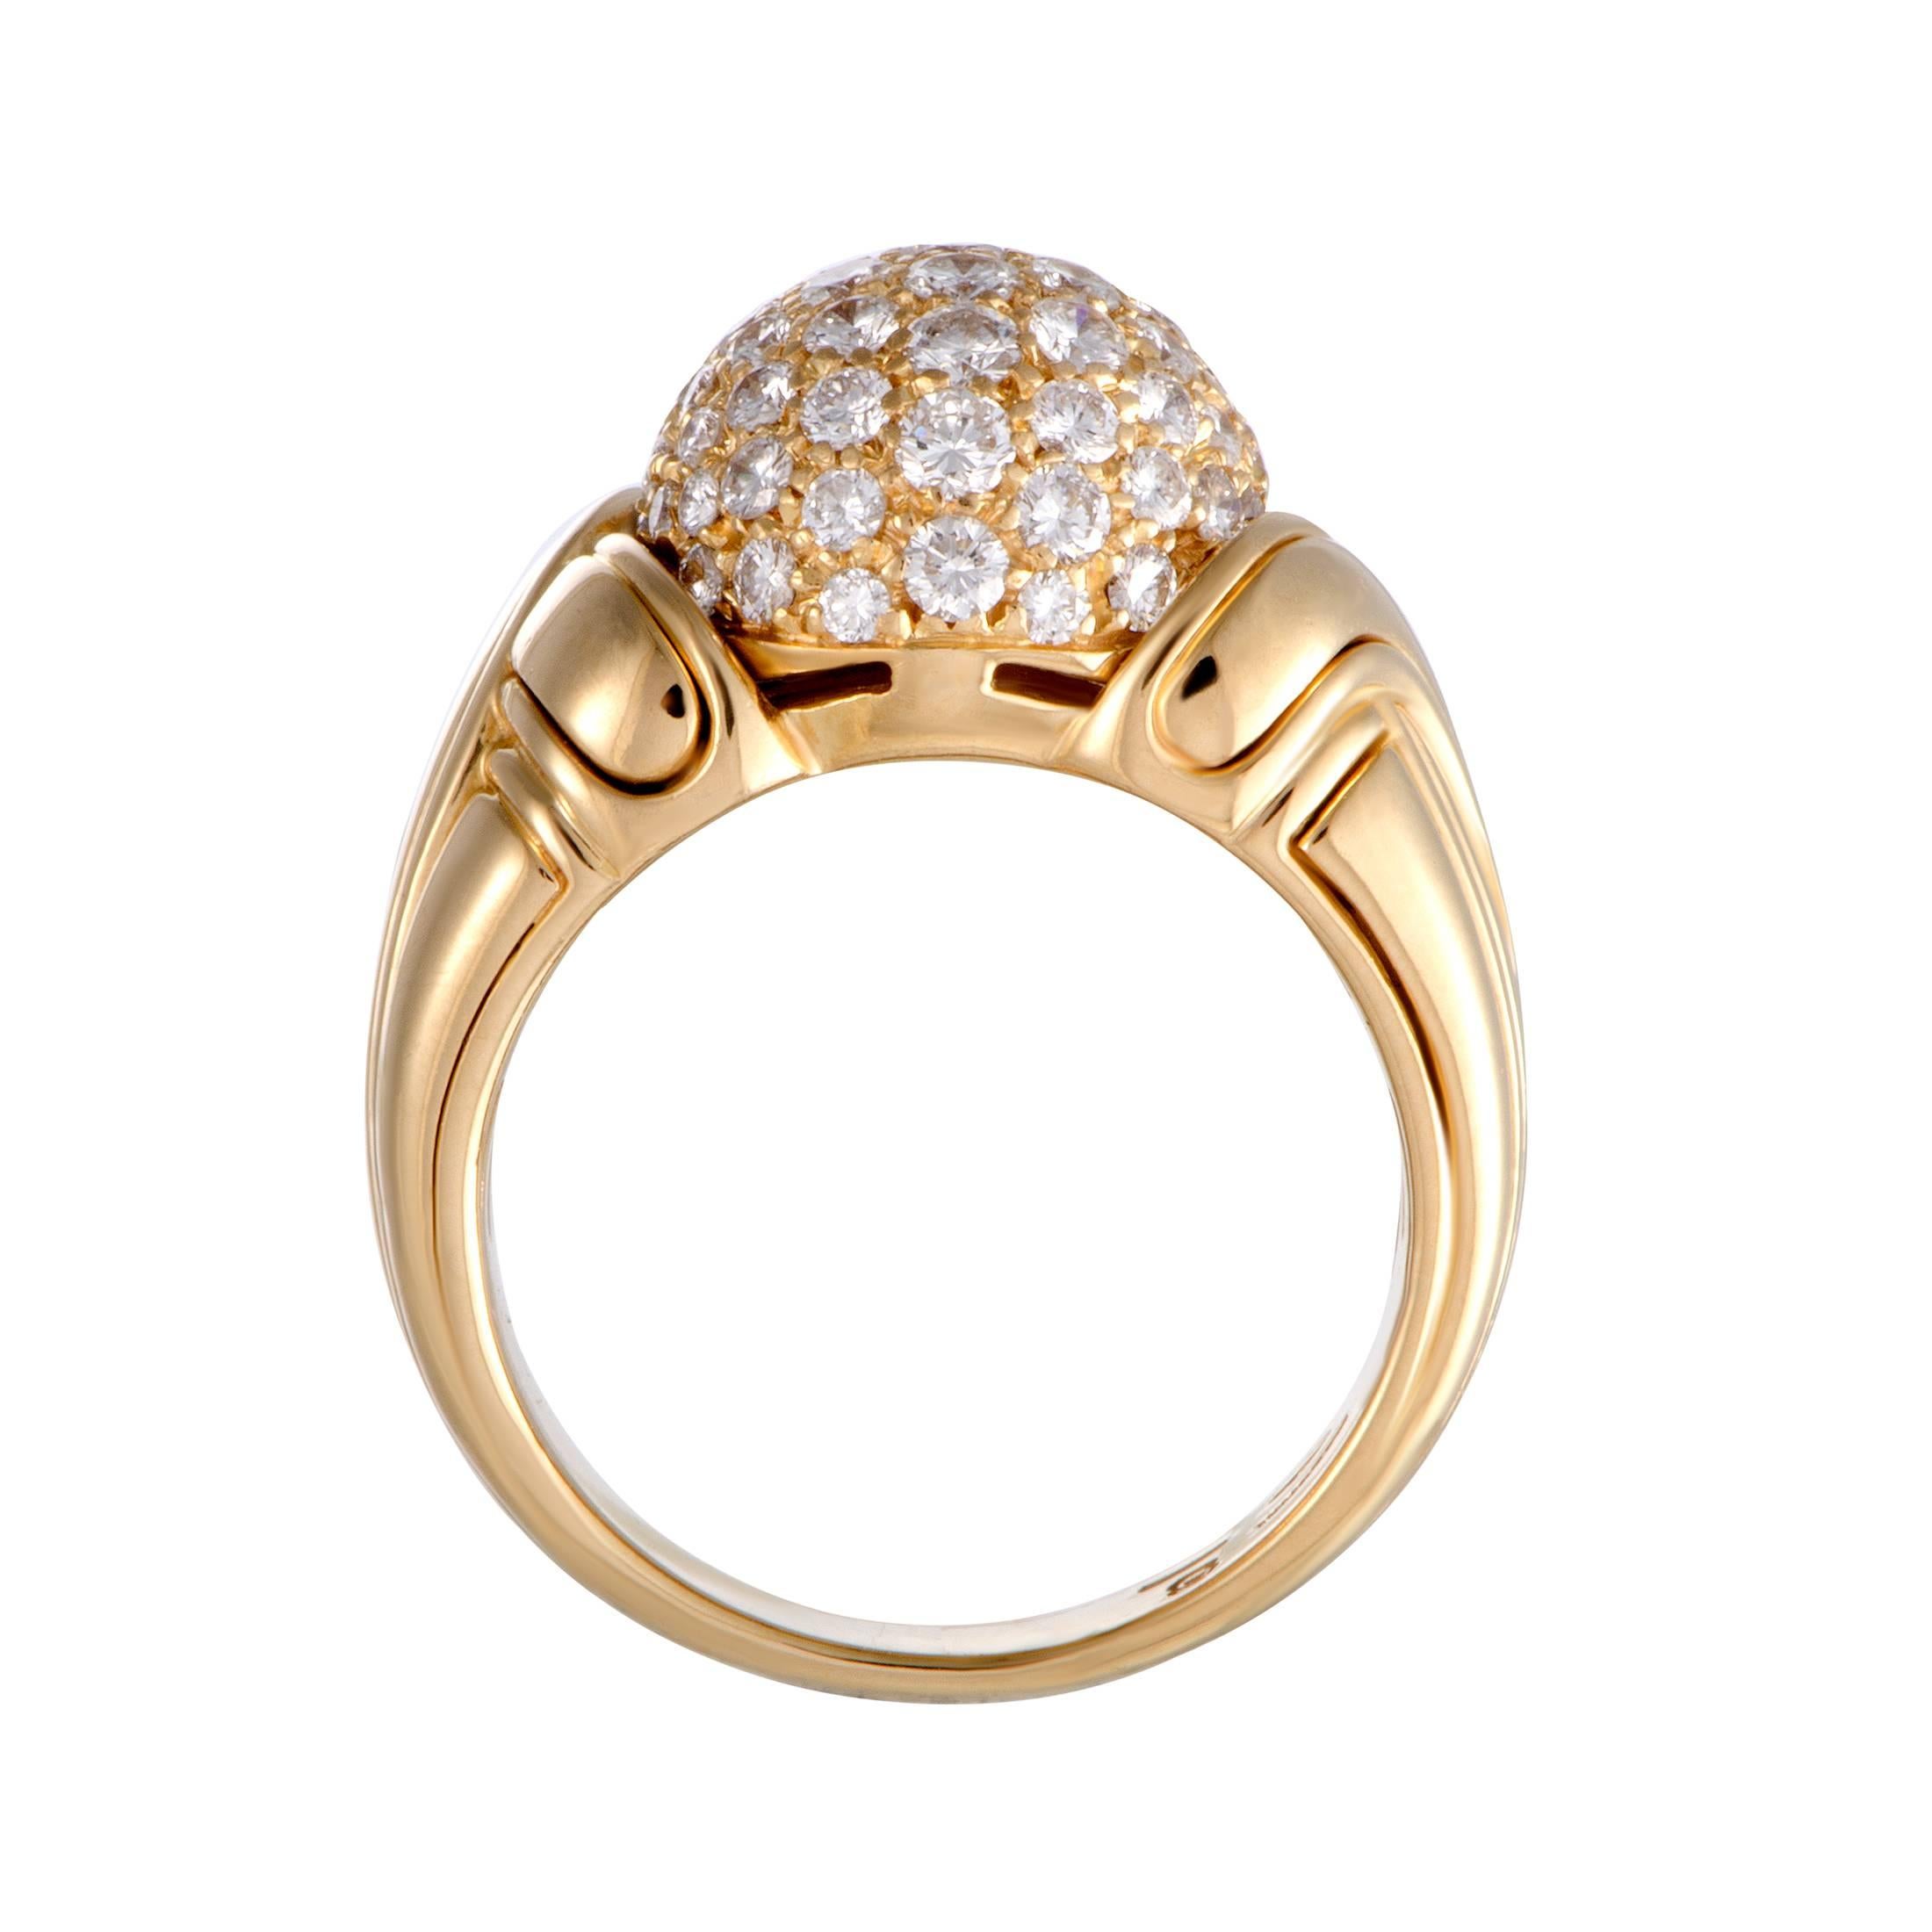 Designed in a splendidly elegant manner and luxuriously decorated with resplendent diamonds, this stunning Bulgari ring exudes prestige and refinement. The ring is made of 18K yellow gold and set with a total of approximately 1.20 carats of